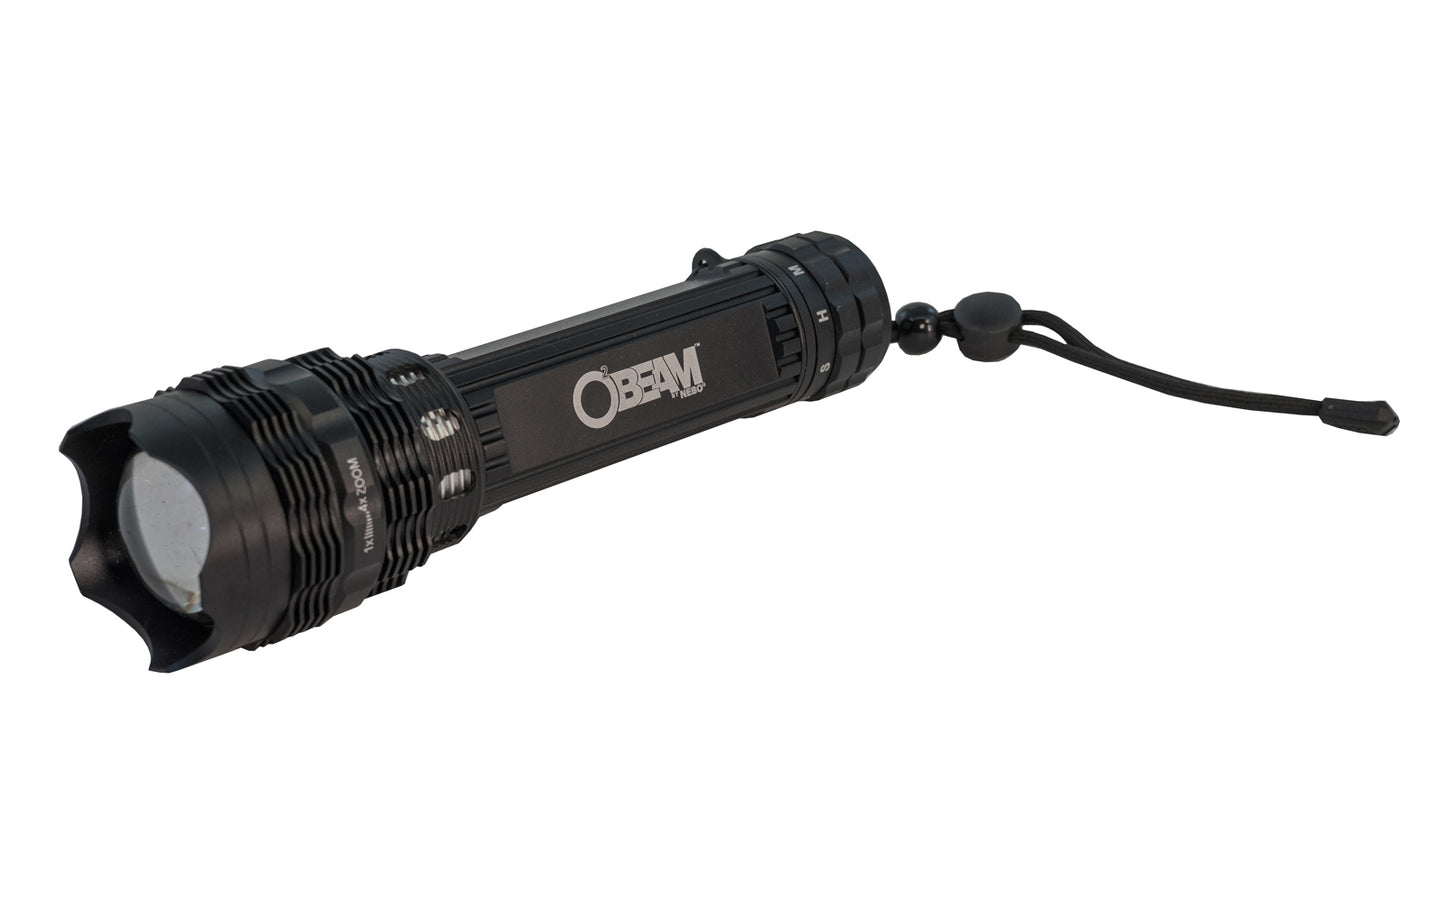 Nebo 6000 O2 Beam Flashlight. High Power 420 Lumen LED. Convex Lens Evenly Distributes The Light For A Highly-Concentrated Beam, Without Dull Or Dark Spots. Anodized Aircraft Grade Aluminum Water-Resistant Body. Includes hard case ~ 645397929185